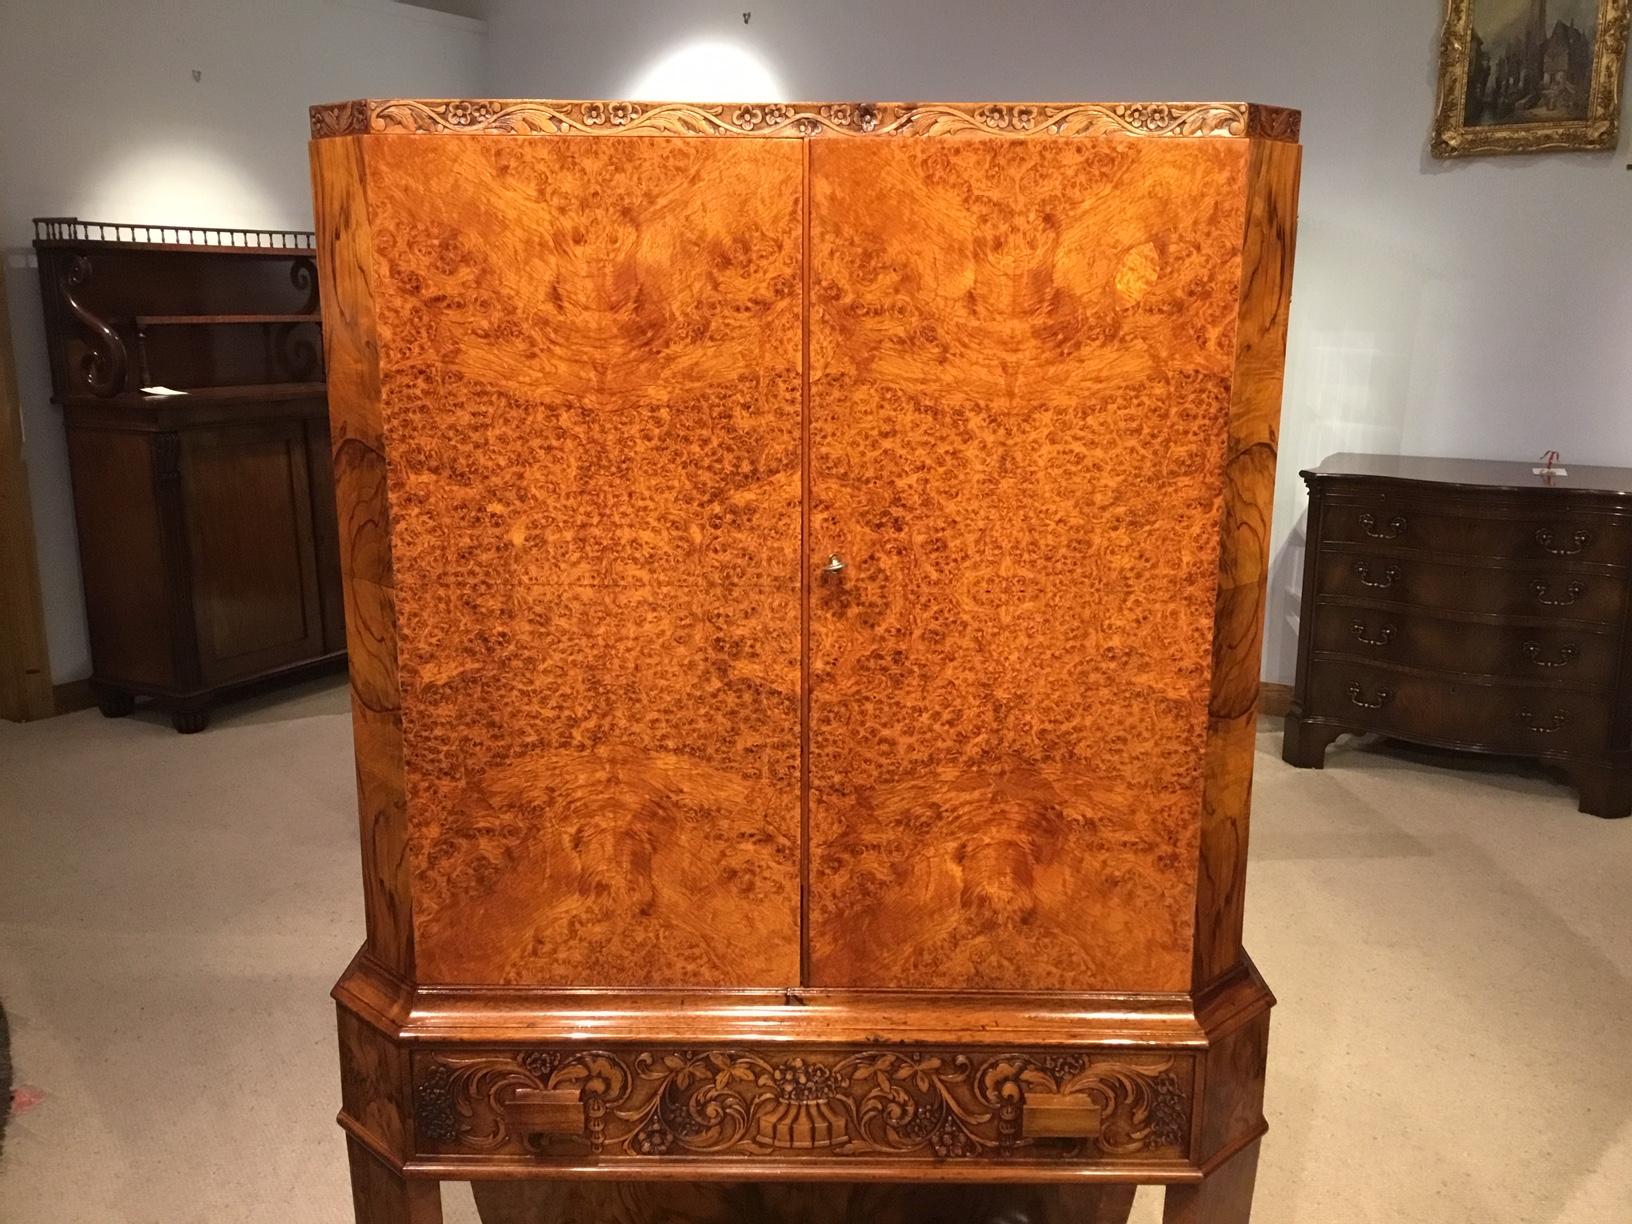 A stunning quality burr walnut Art Deco Period antique cocktail cabinet. The upper section with a rectangular top veneered in burr walnut with canted corners and a finely carved moulded edge, above the twin shaped doors veneered in the finest burr